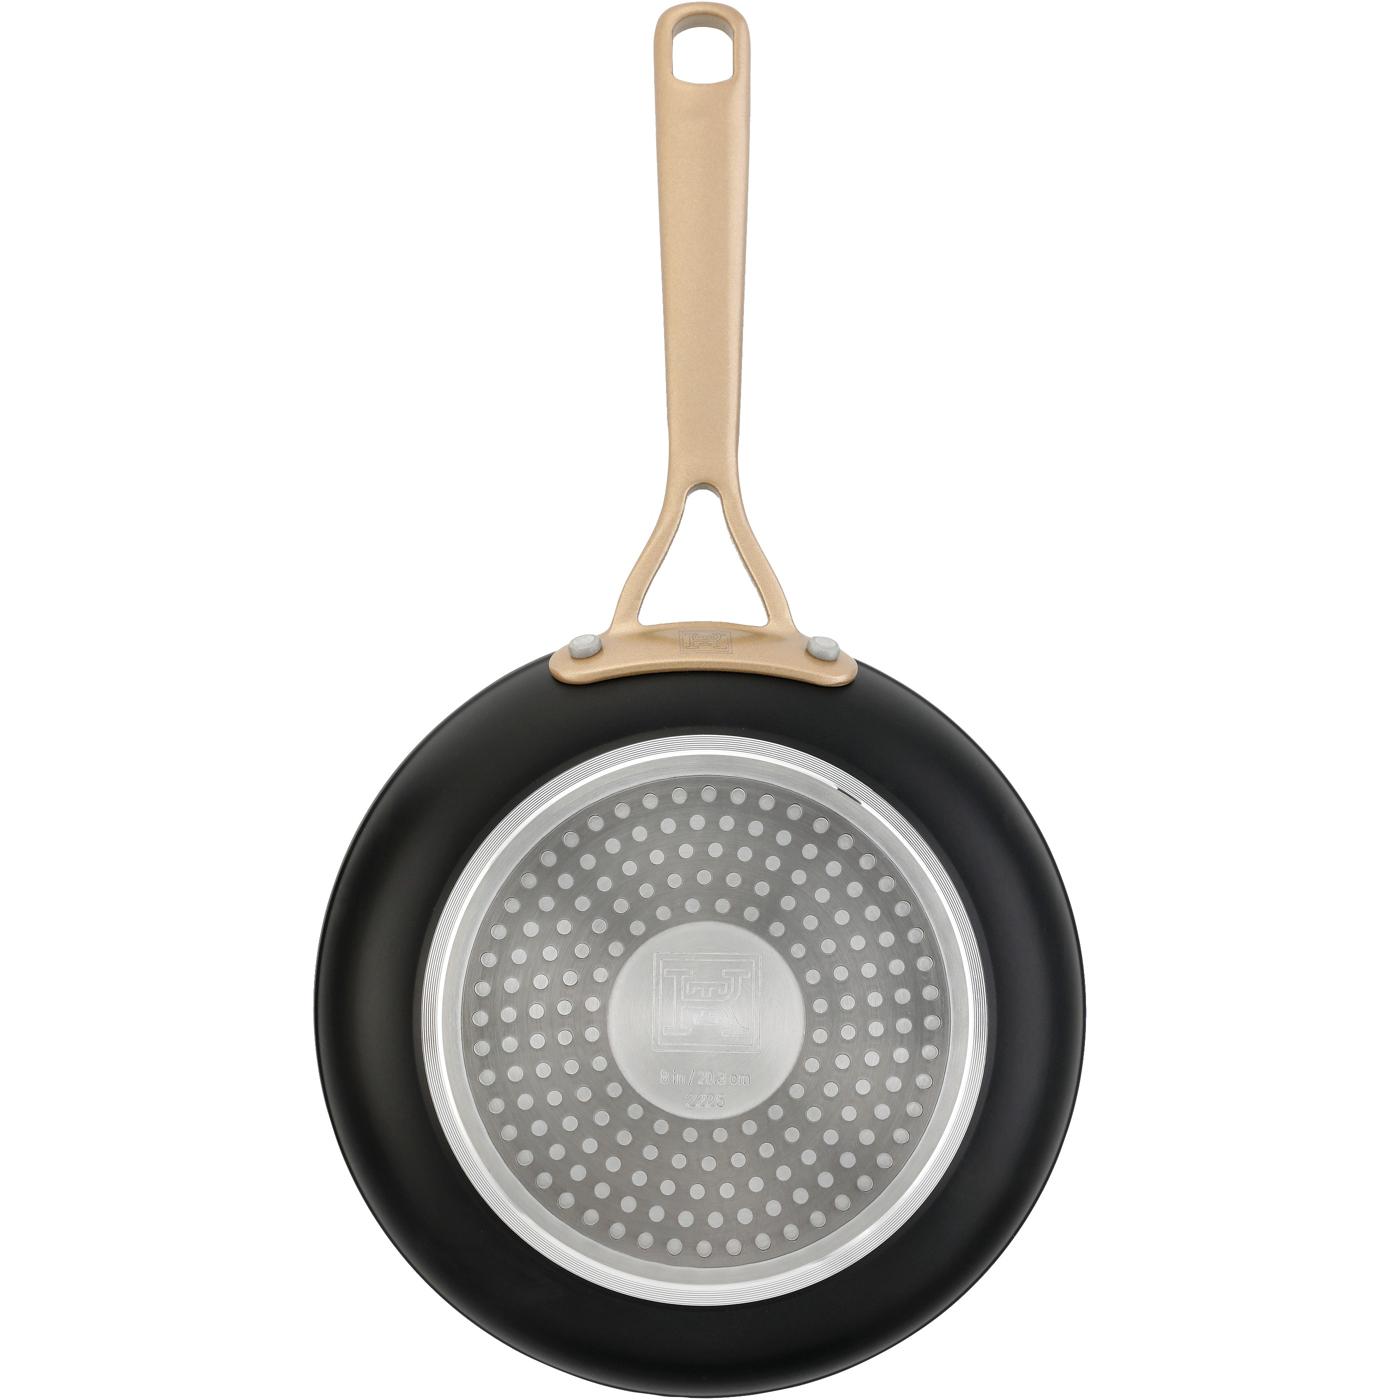 Kitchen & Table by H-E-B Non-Stick Fry Pan - Classic Black; image 2 of 6